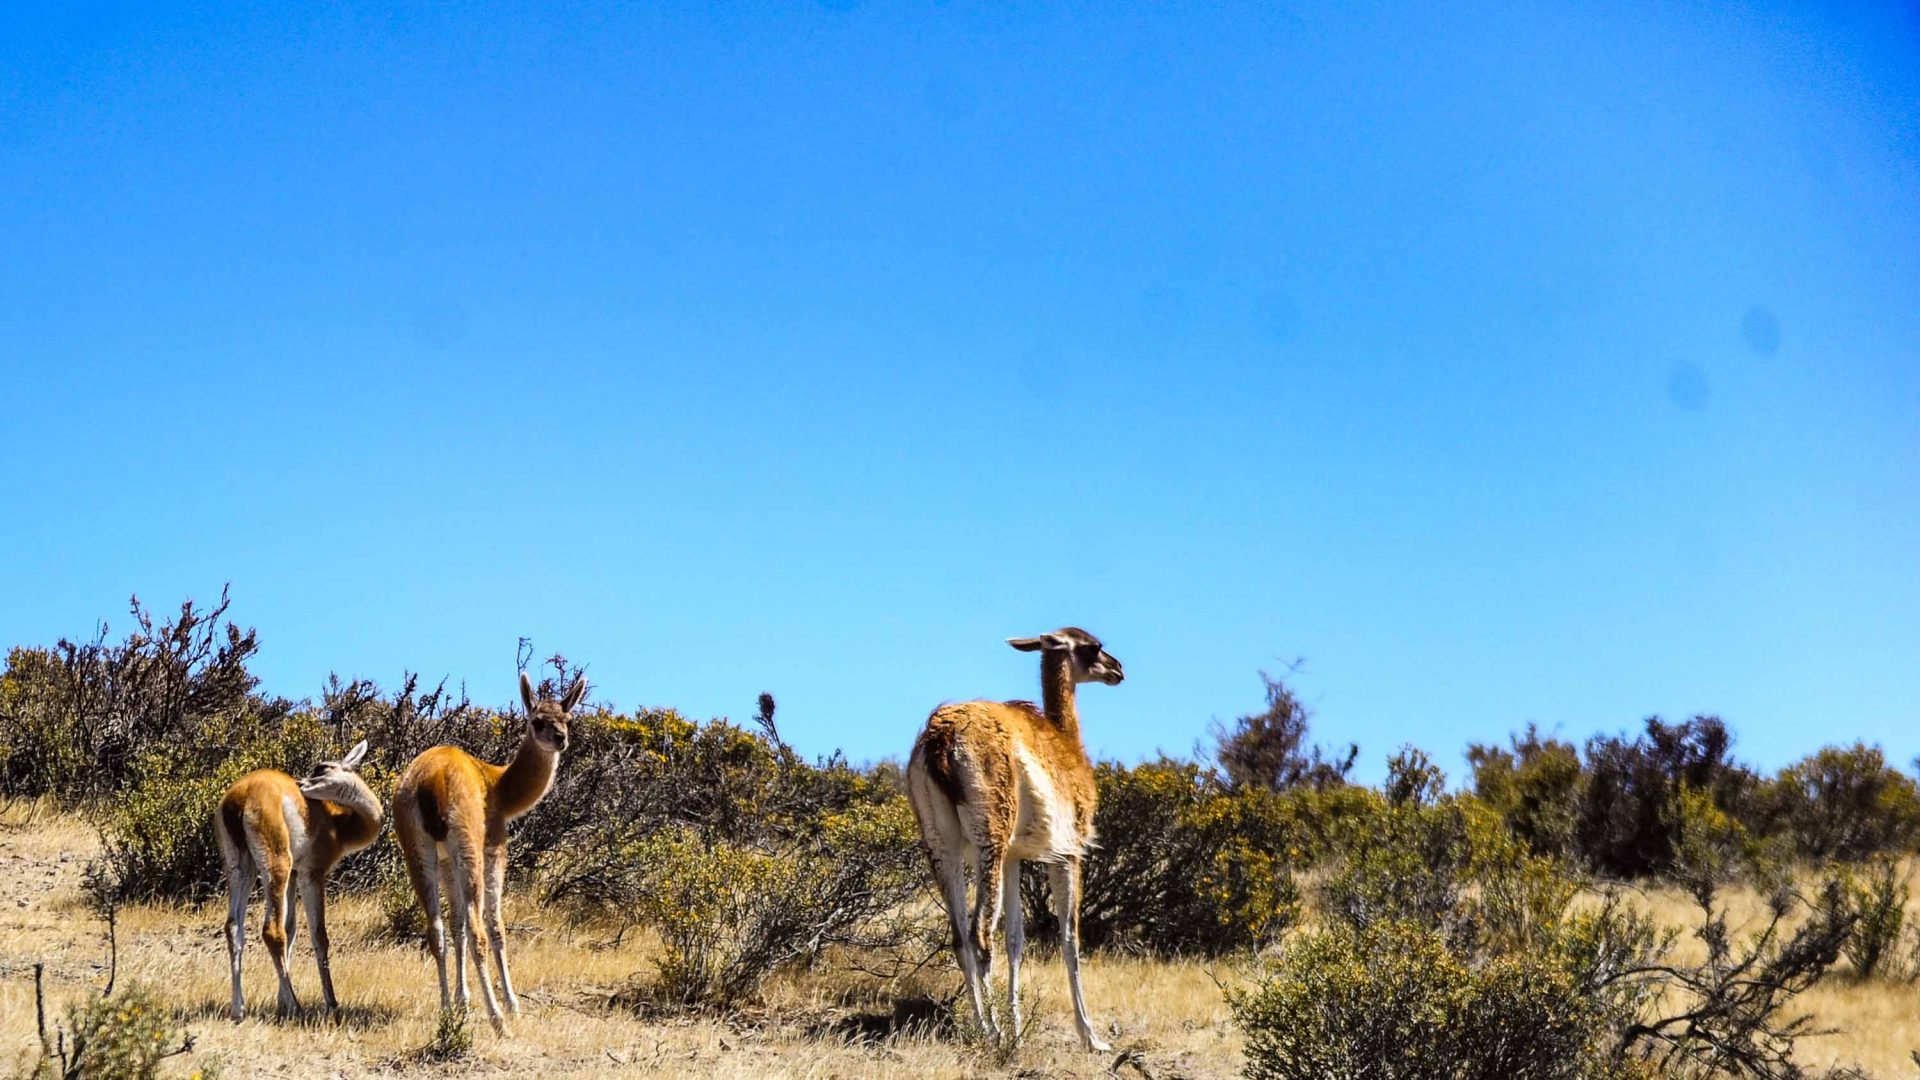 Guanacos stand on a dry area of land surrounded by shrubs.